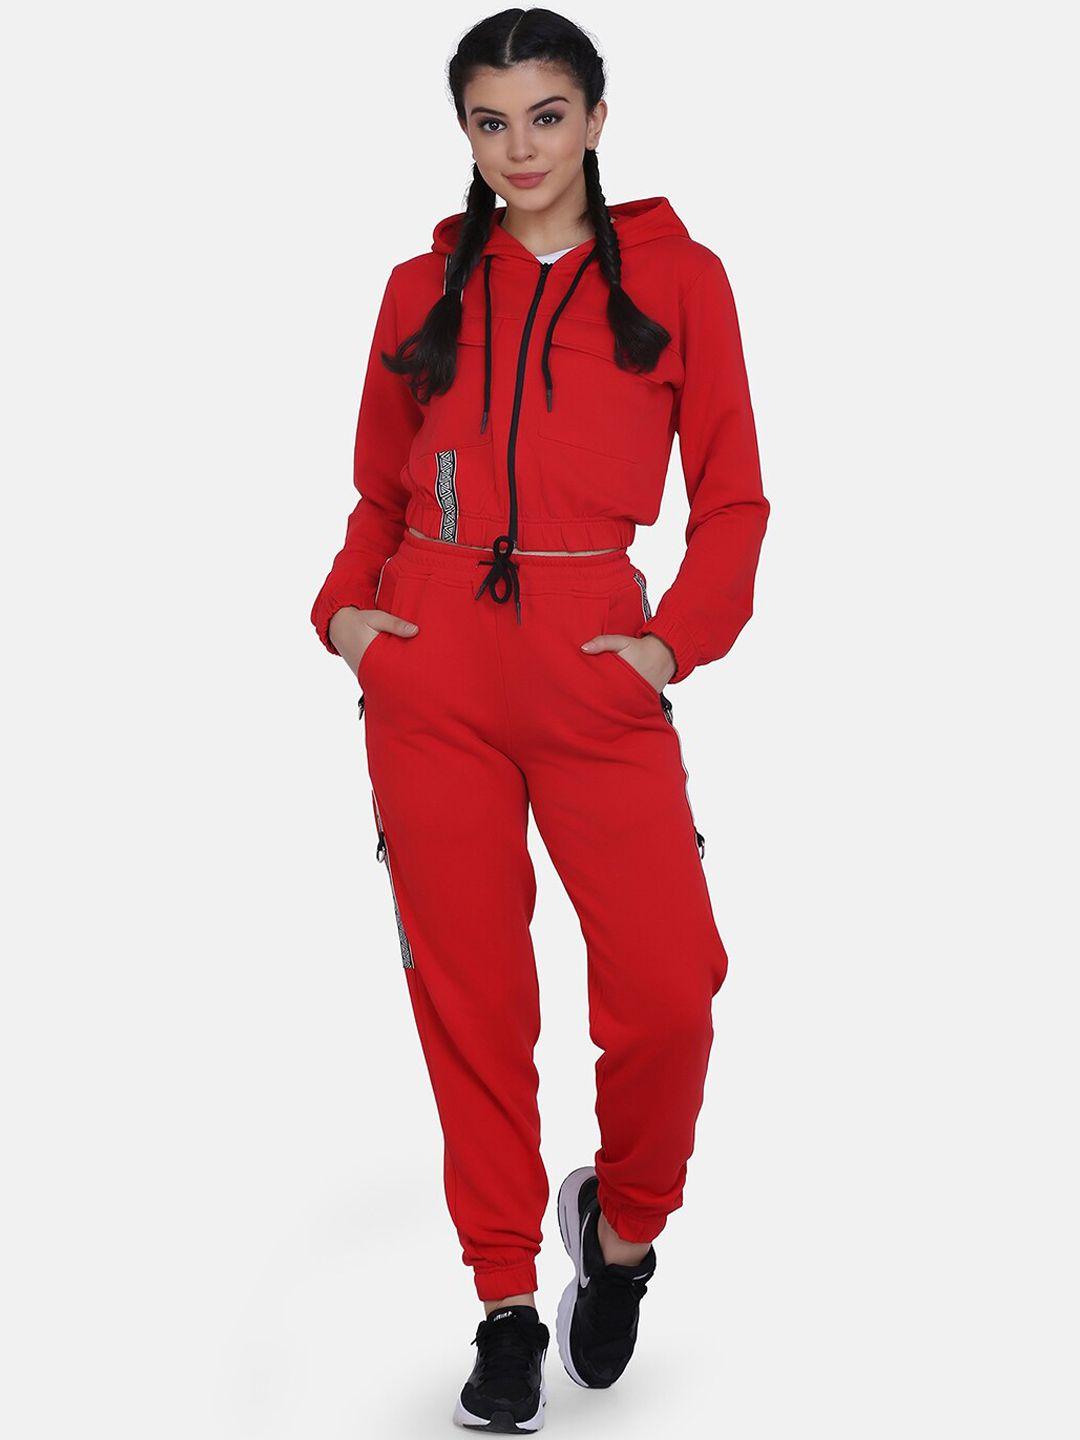 aesthetic bodies women hooded cotton sports tracksuits